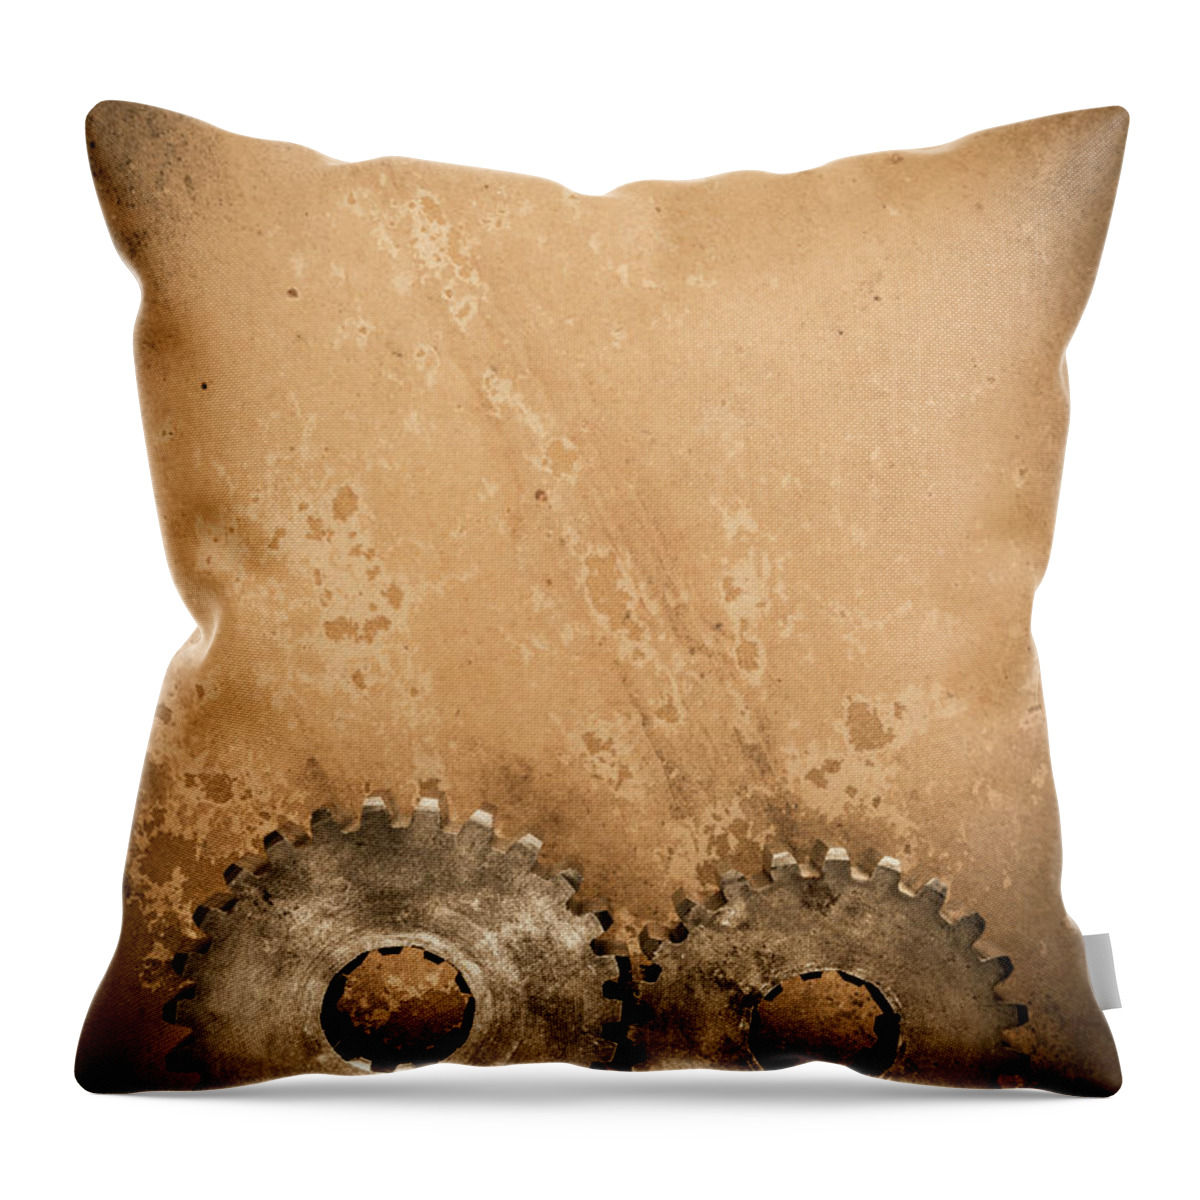 Coordination Throw Pillow featuring the photograph Gears On Textured Paper by Gary S Chapman